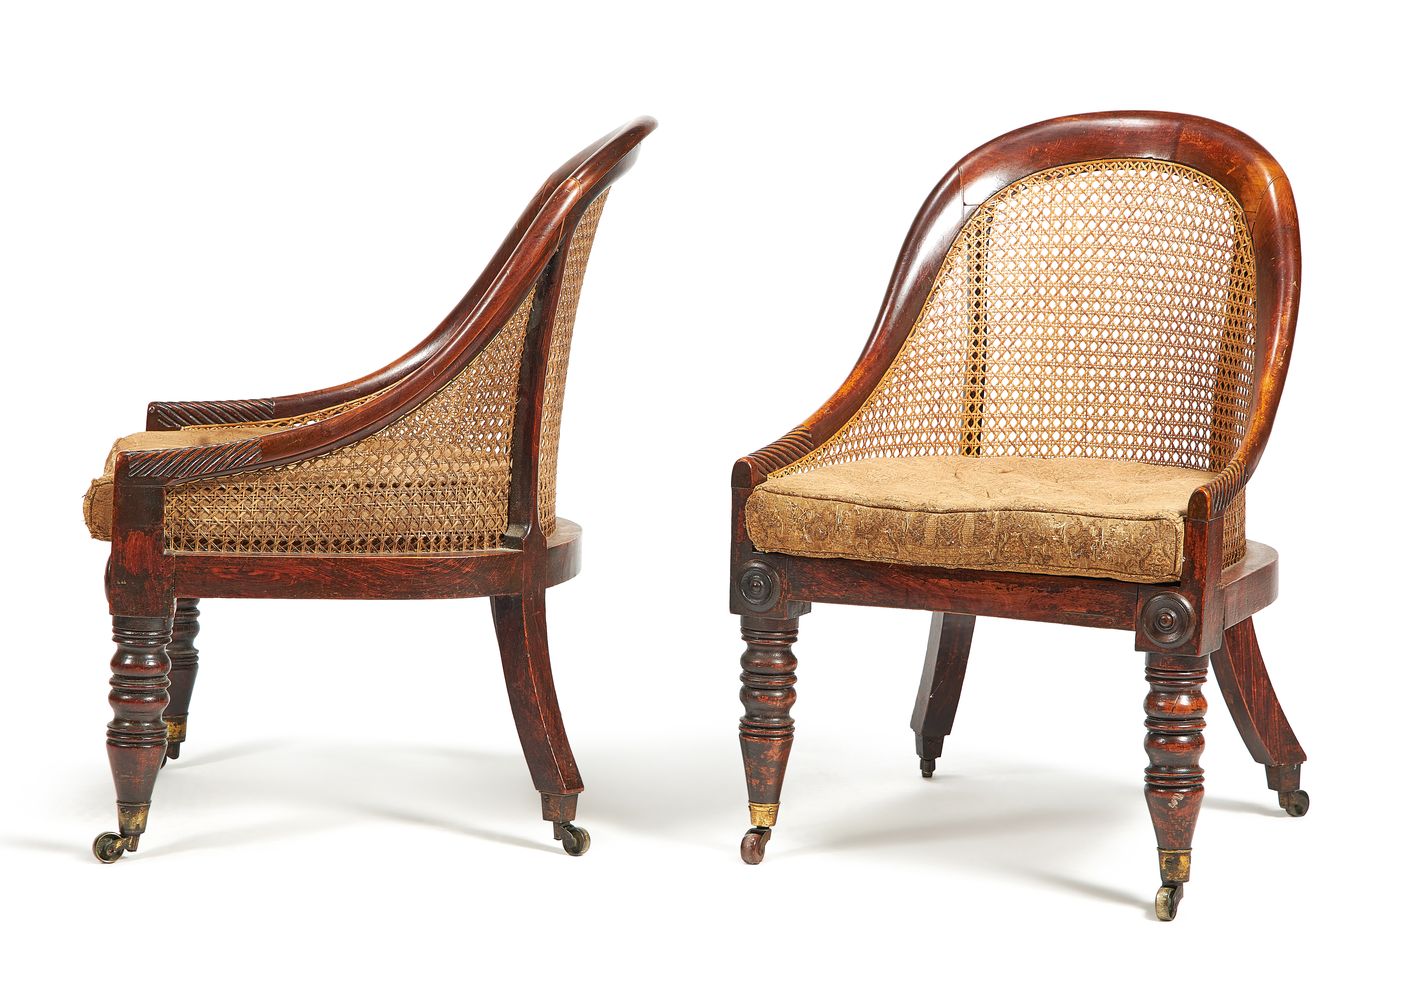 A pair of Regency simulated rosewood bergere chairs, circa 1815 - Image 3 of 5